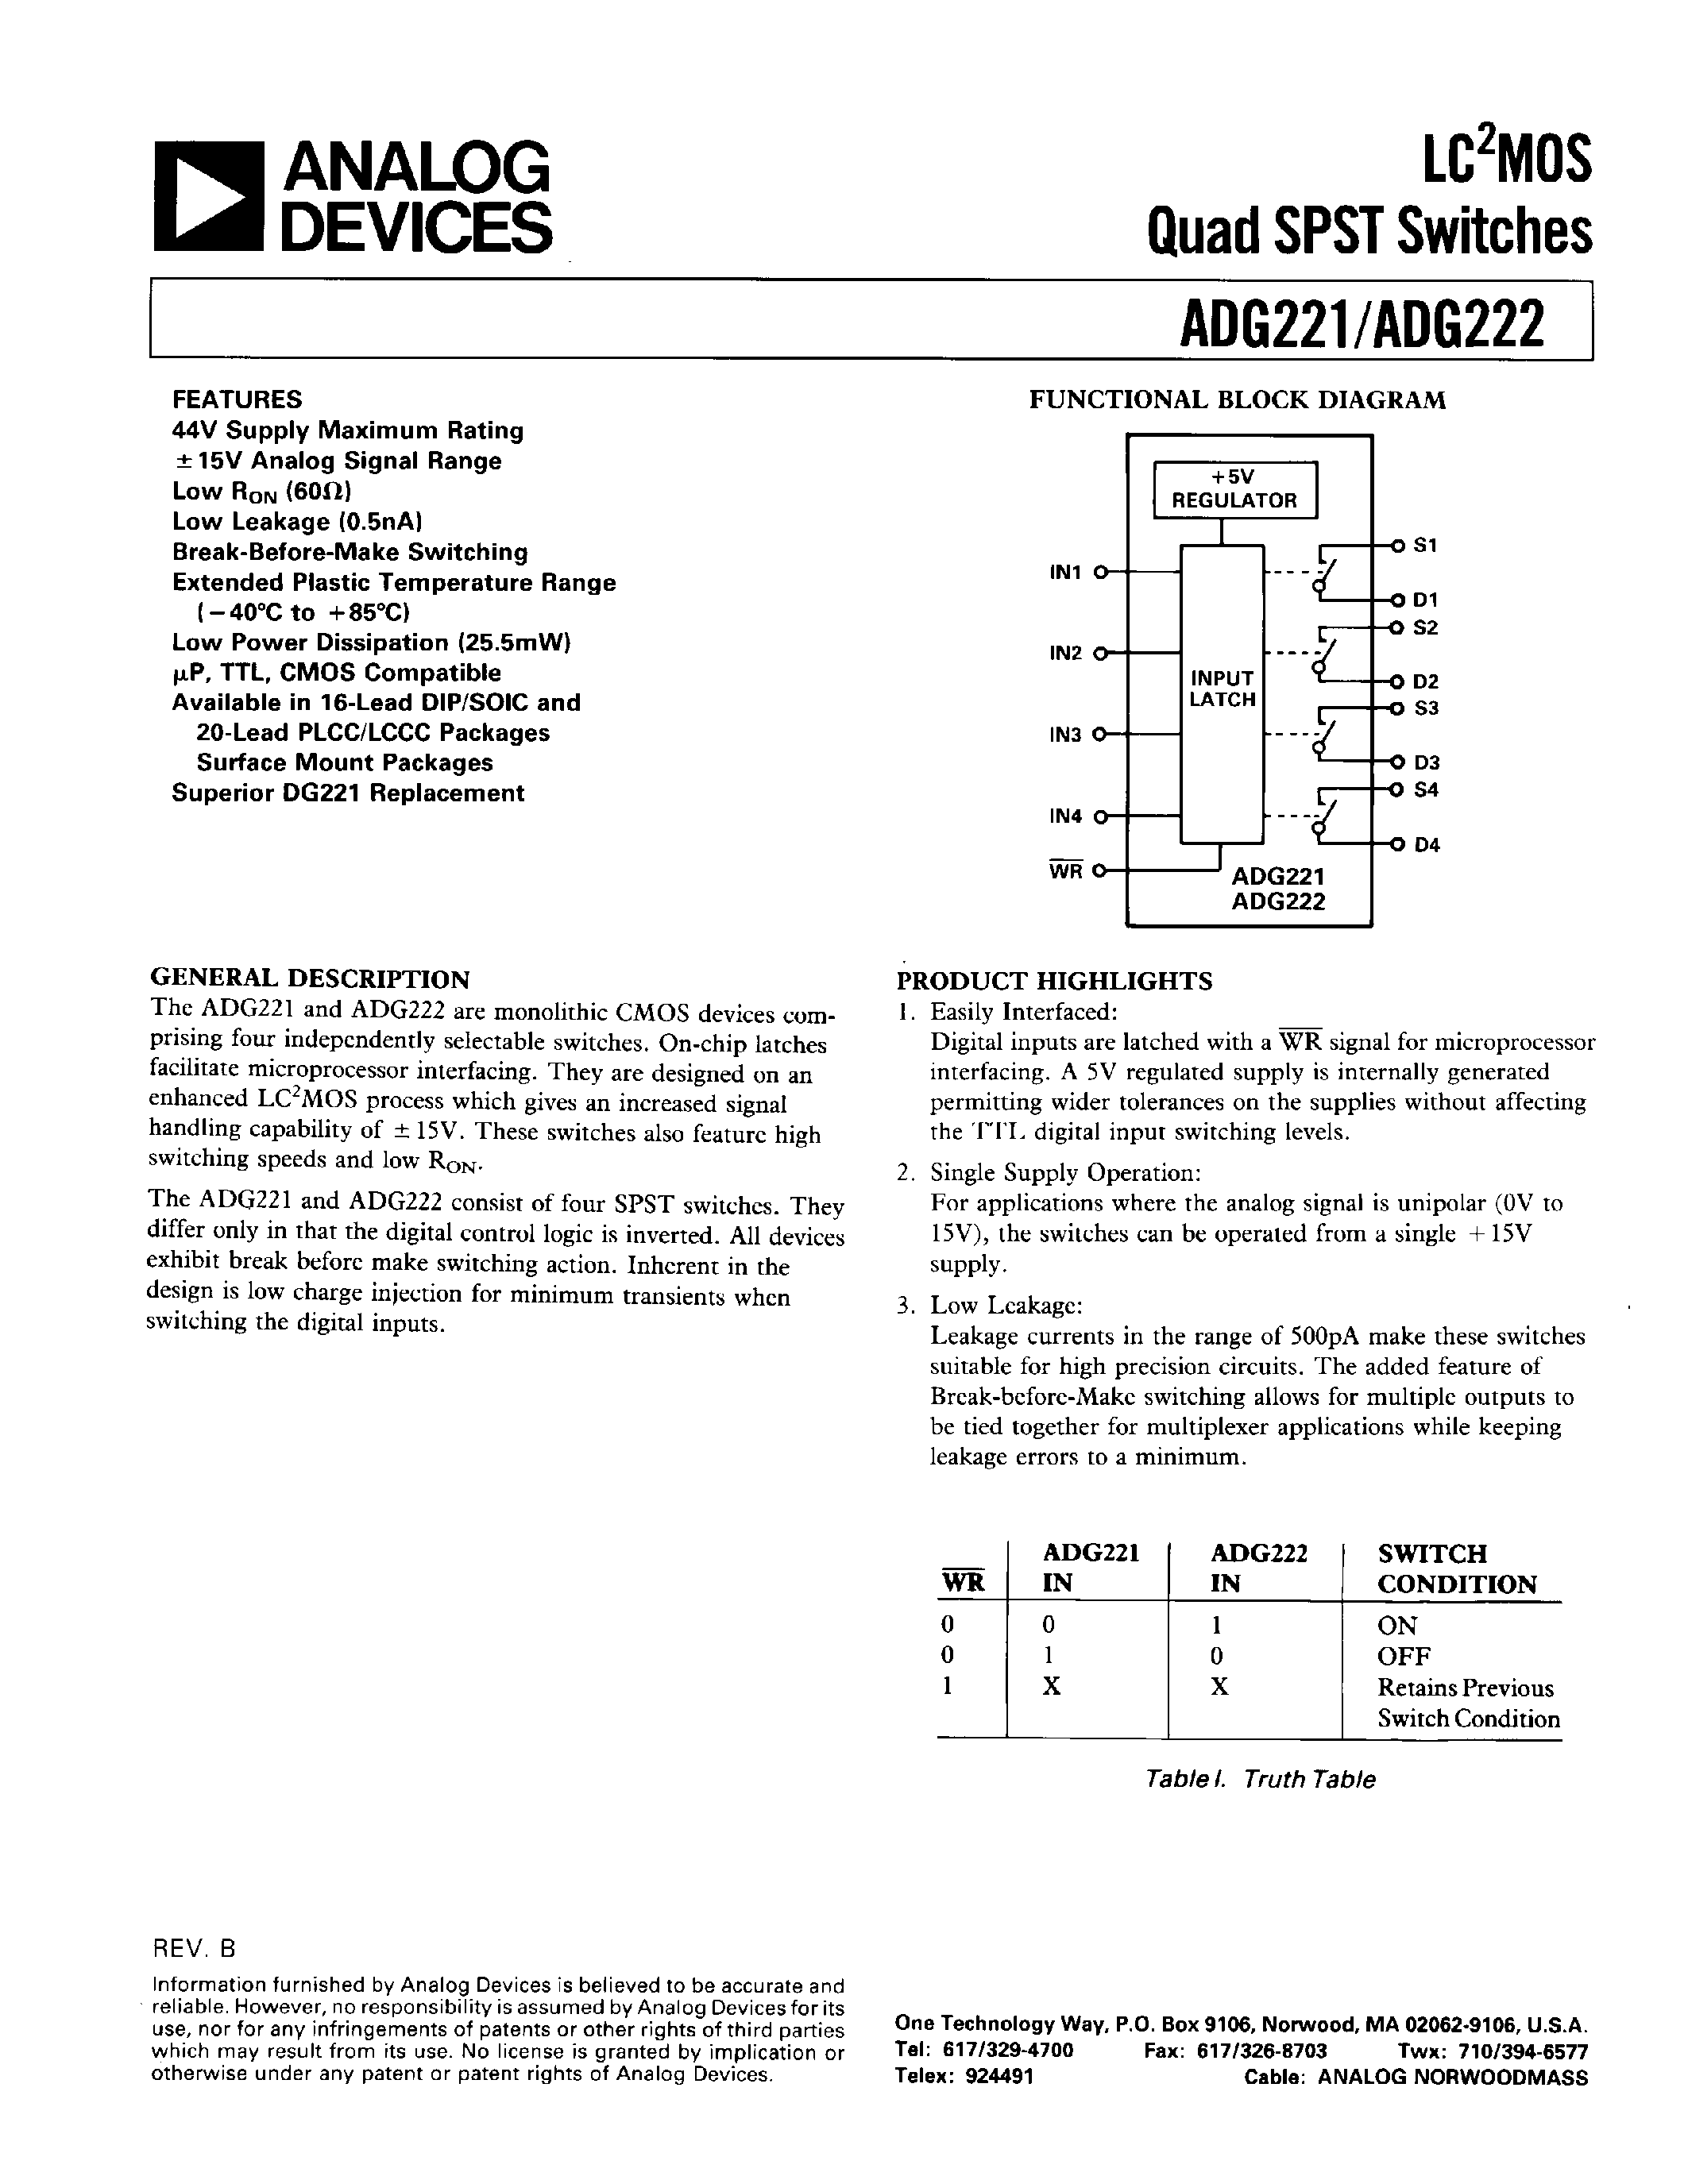 Datasheet ADG222KN - LC2MOS QUAD SPST SWITCHES page 1